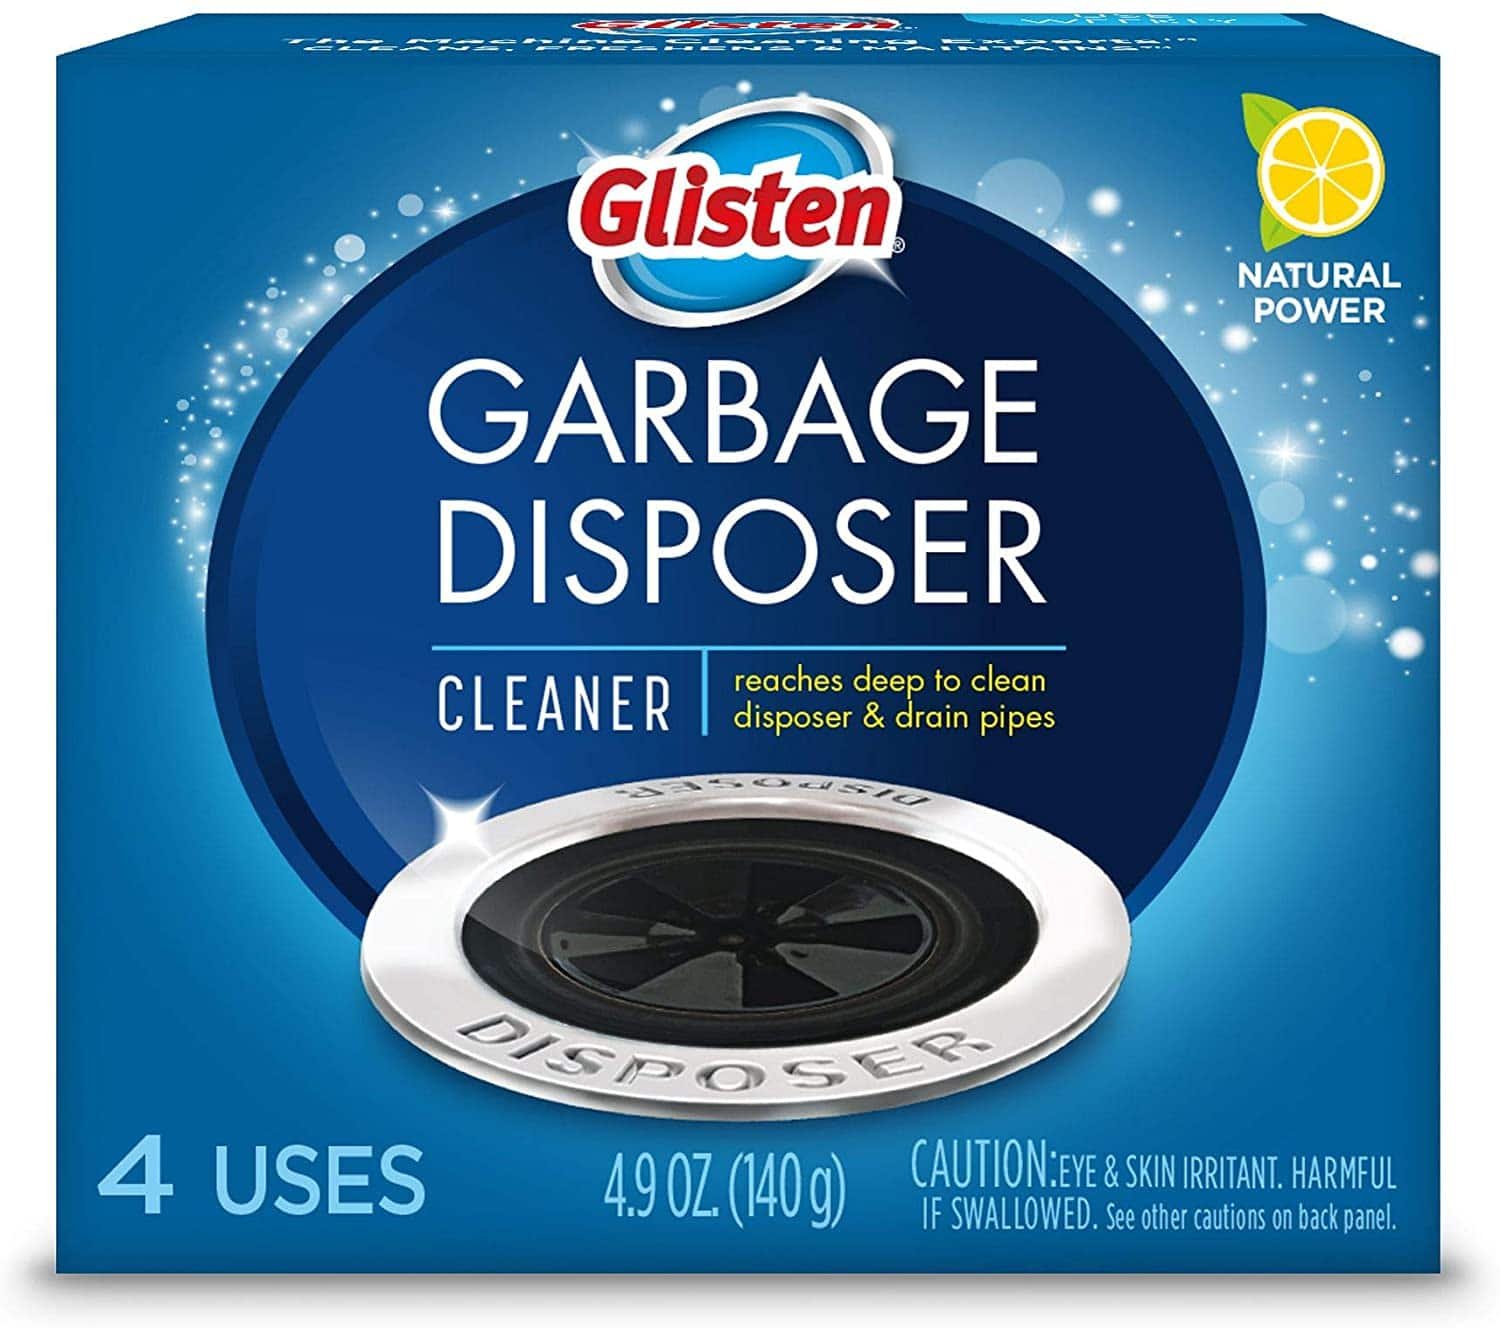 Glisten Garbage Disposal Cleaner and Odor Eliminator with Foaming Action